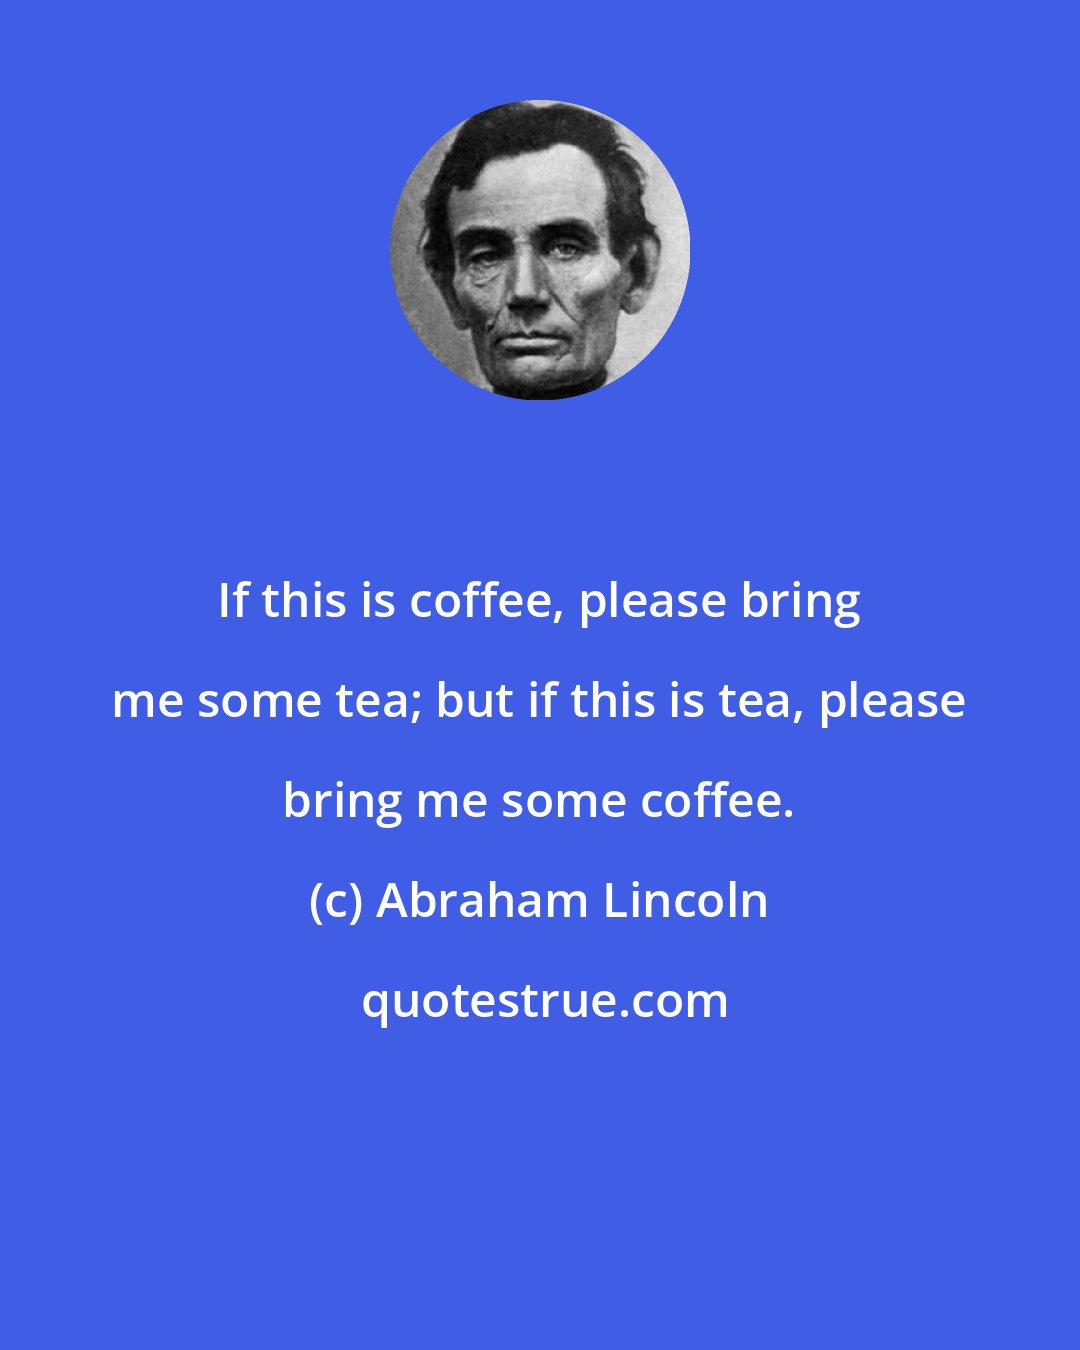 Abraham Lincoln: If this is coffee, please bring me some tea; but if this is tea, please bring me some coffee.